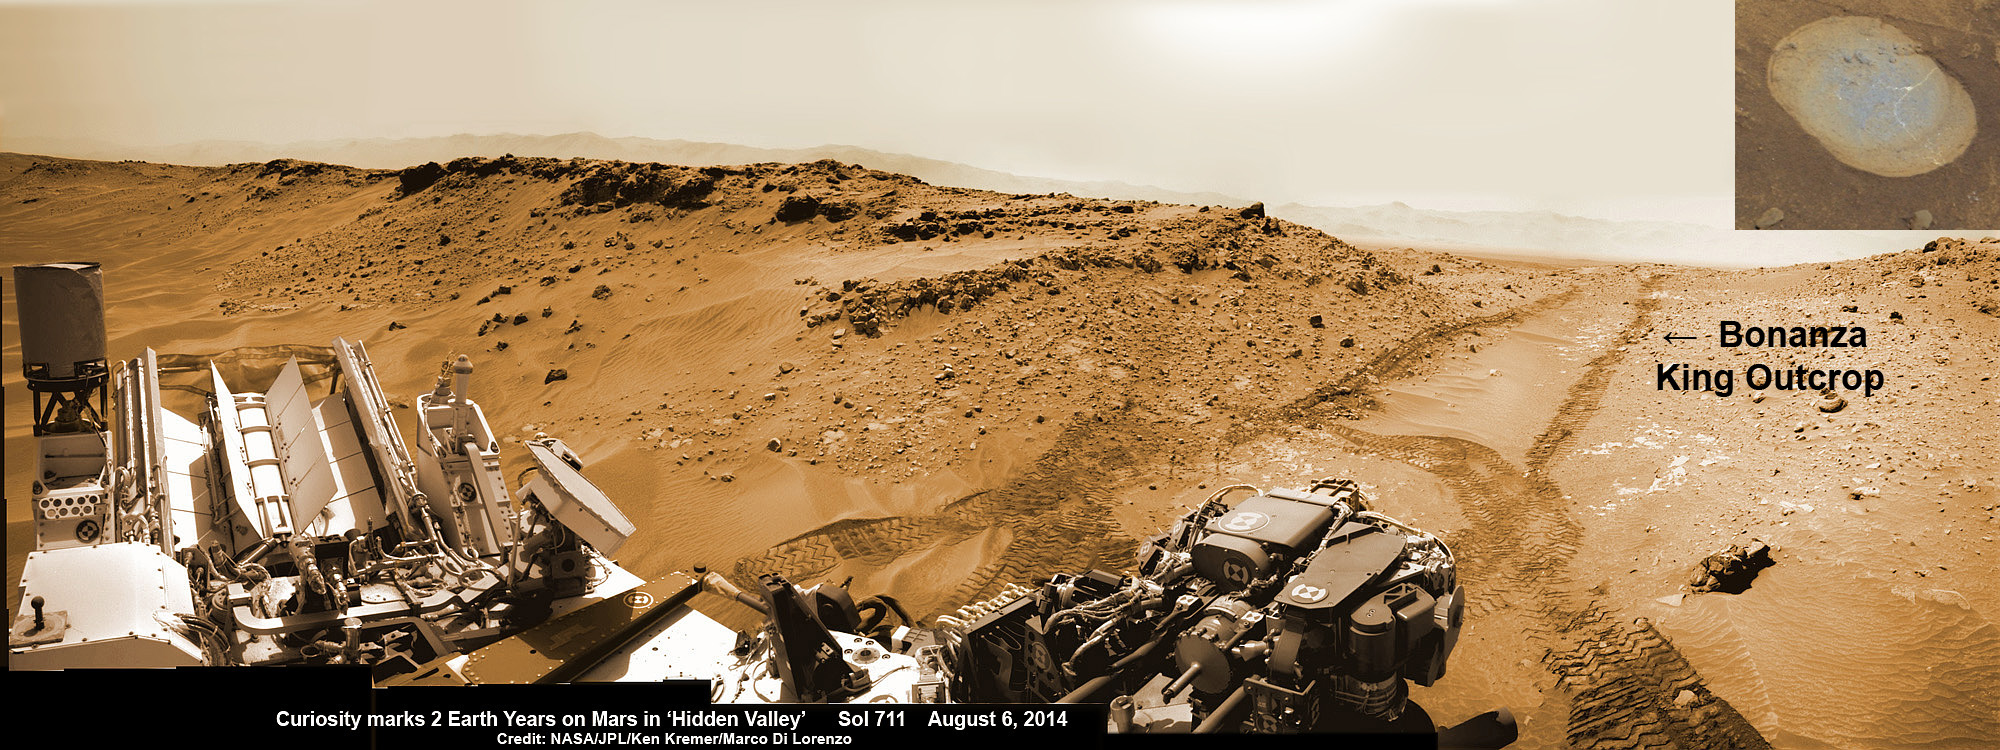 NASA’s Curiosity rover looks back to ramp with abandoned 4th drill site target at ‘Bonanza King’ rock outcrop in ‘Hidden Valley’ in this photo mosaic view captured on Aug. 6, 2014, Sol 711.  Inset shows results of brushing on Aug. 17, Sol 722 that revealed gray patch beneath red dust.  Note the rover’s partial selfie, valley walls, deep wheel tracks in the sand dunes and distant rim of Gale crater beyond the ramp. Navcam camera raw images stitched and colorized.  Credit: NASA/JPL-Caltech/Ken Kremer-kenkremer.com/Marco Di Lorenzo